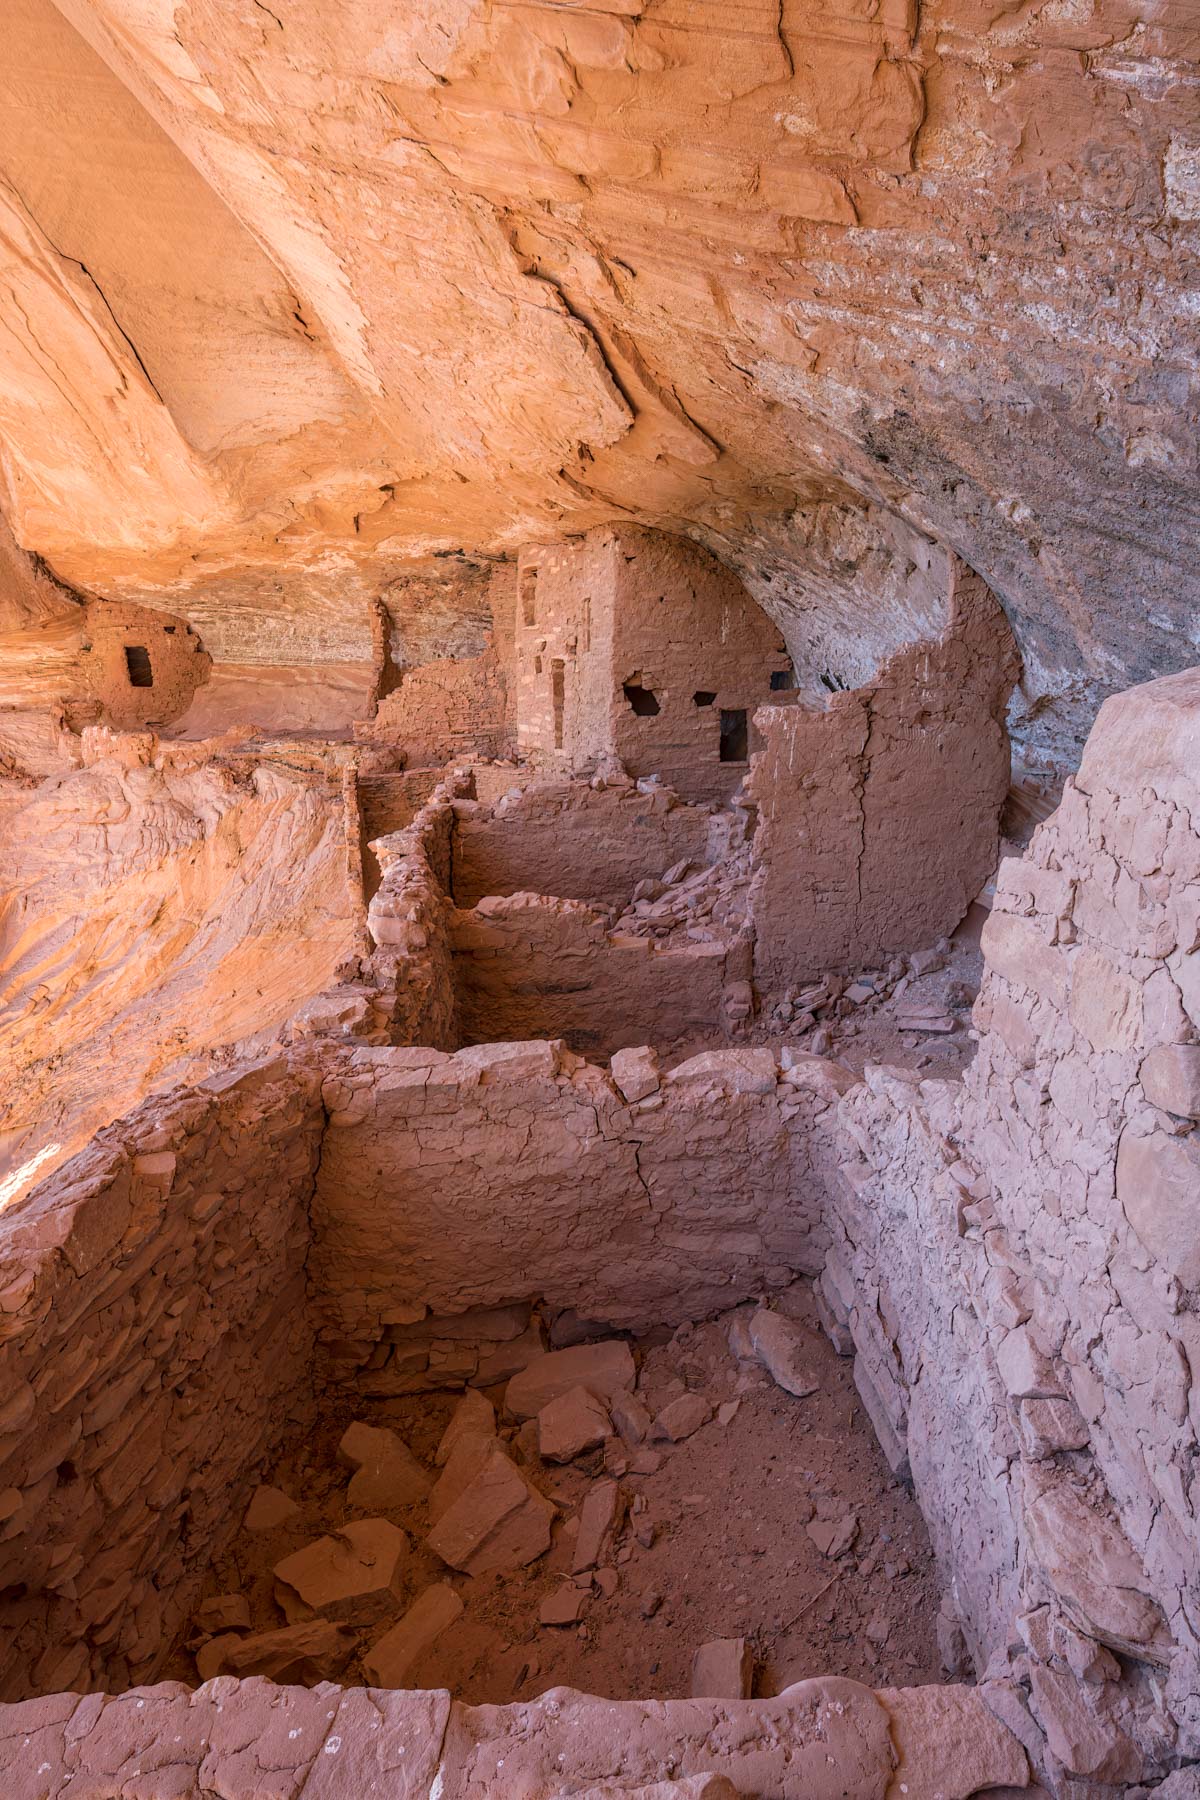 Poncho House Anasazi Cliff Dwelling in the Navajo Nation